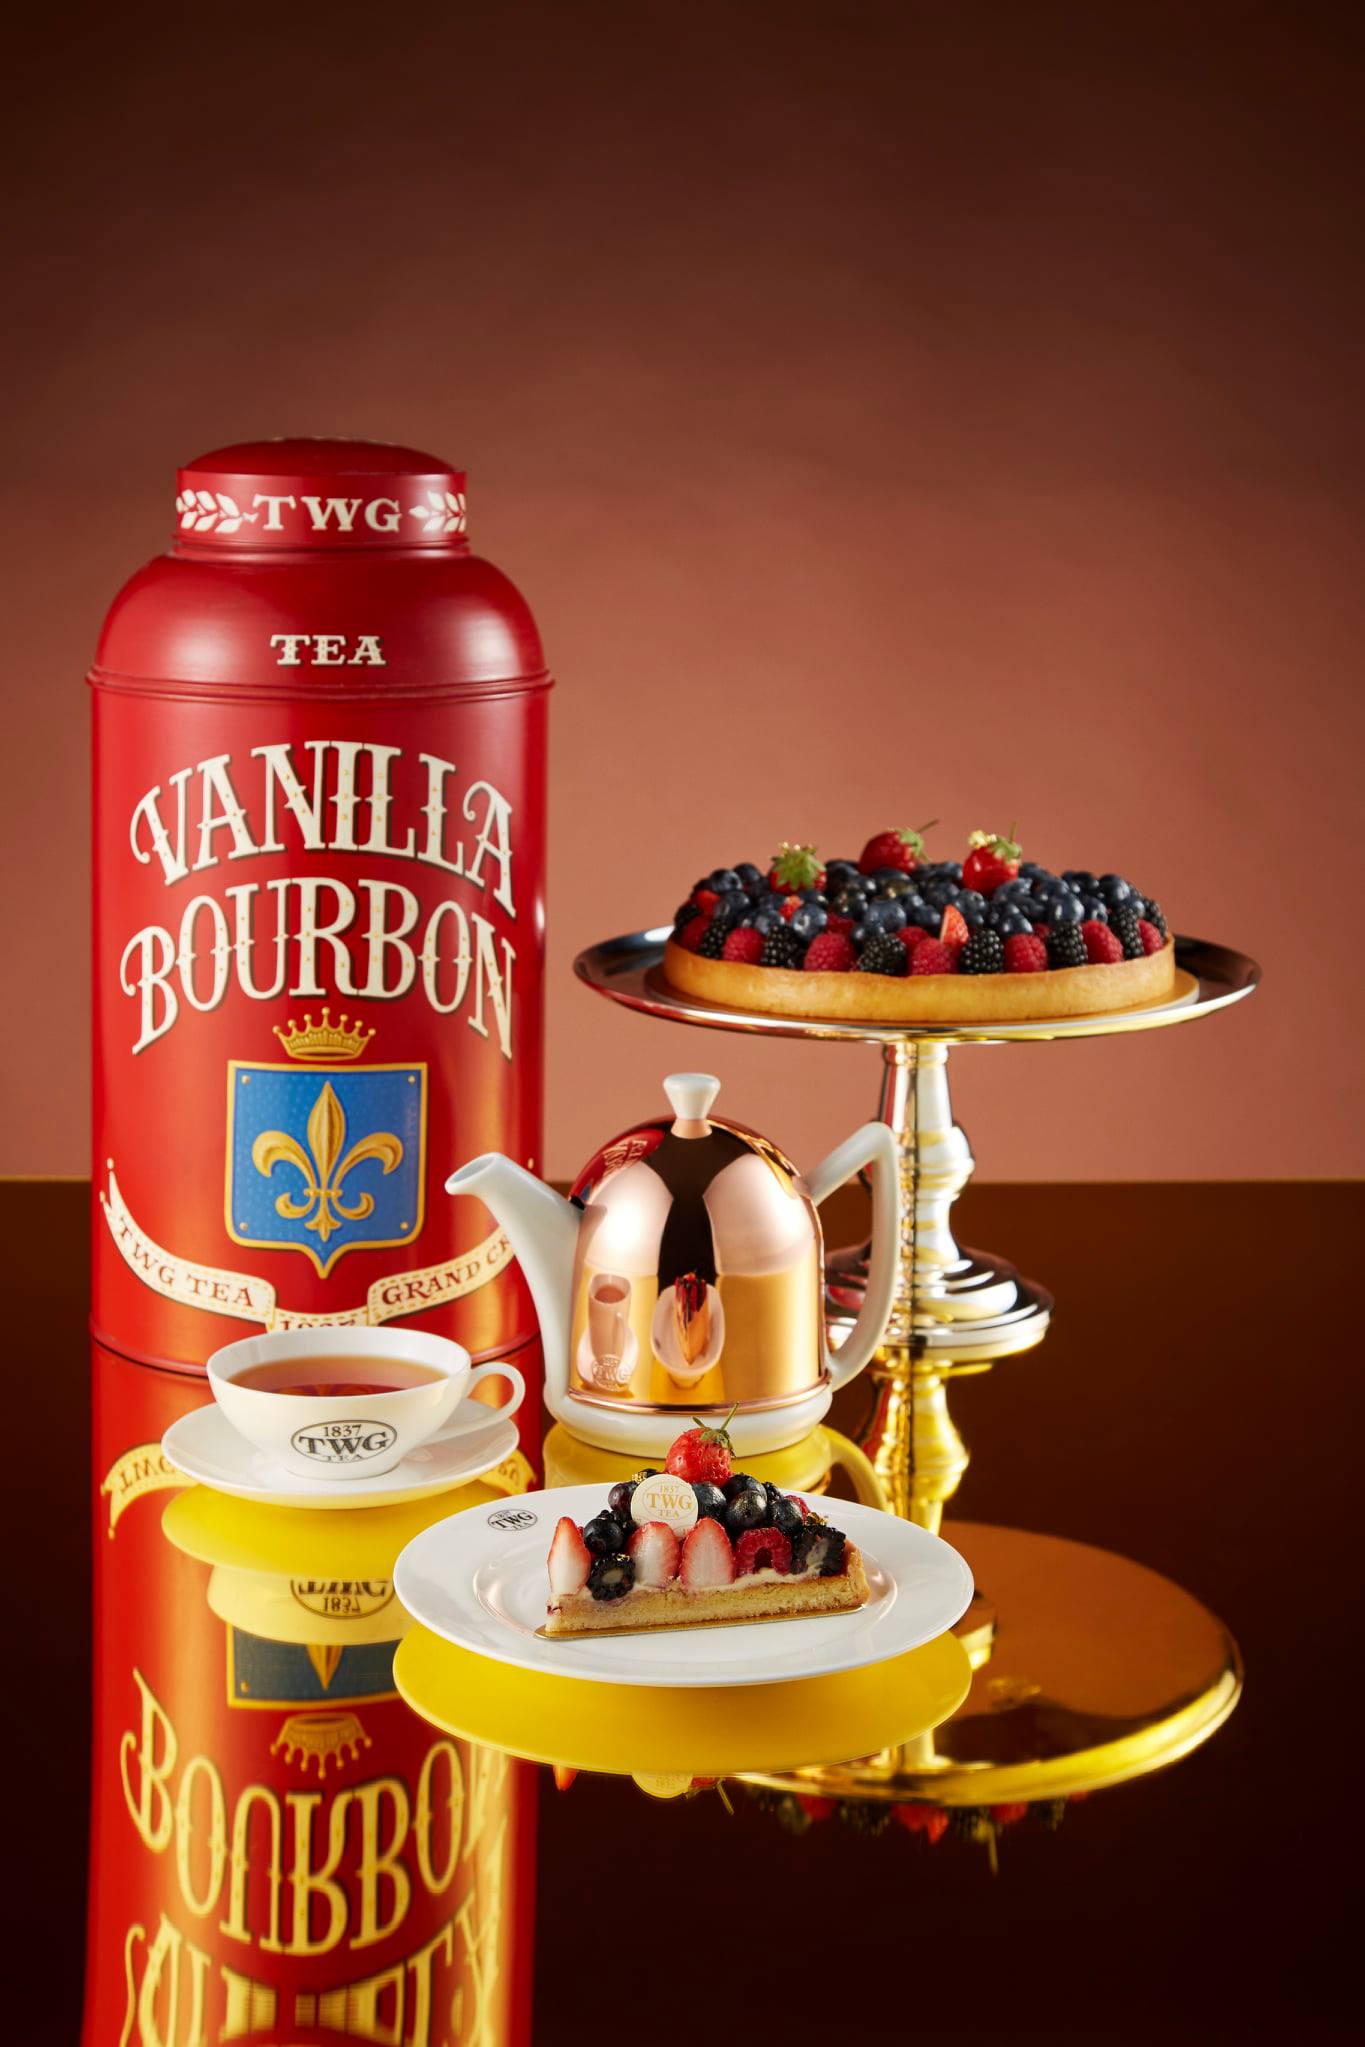 Tarts make for a perfect centrepiece at any afternoon tea party and is now available on TWGTea.com! Preorder your whole cakes and tarts on TWG Tea Digital Boutique and receive 20g of Singapore Surprise Tea.